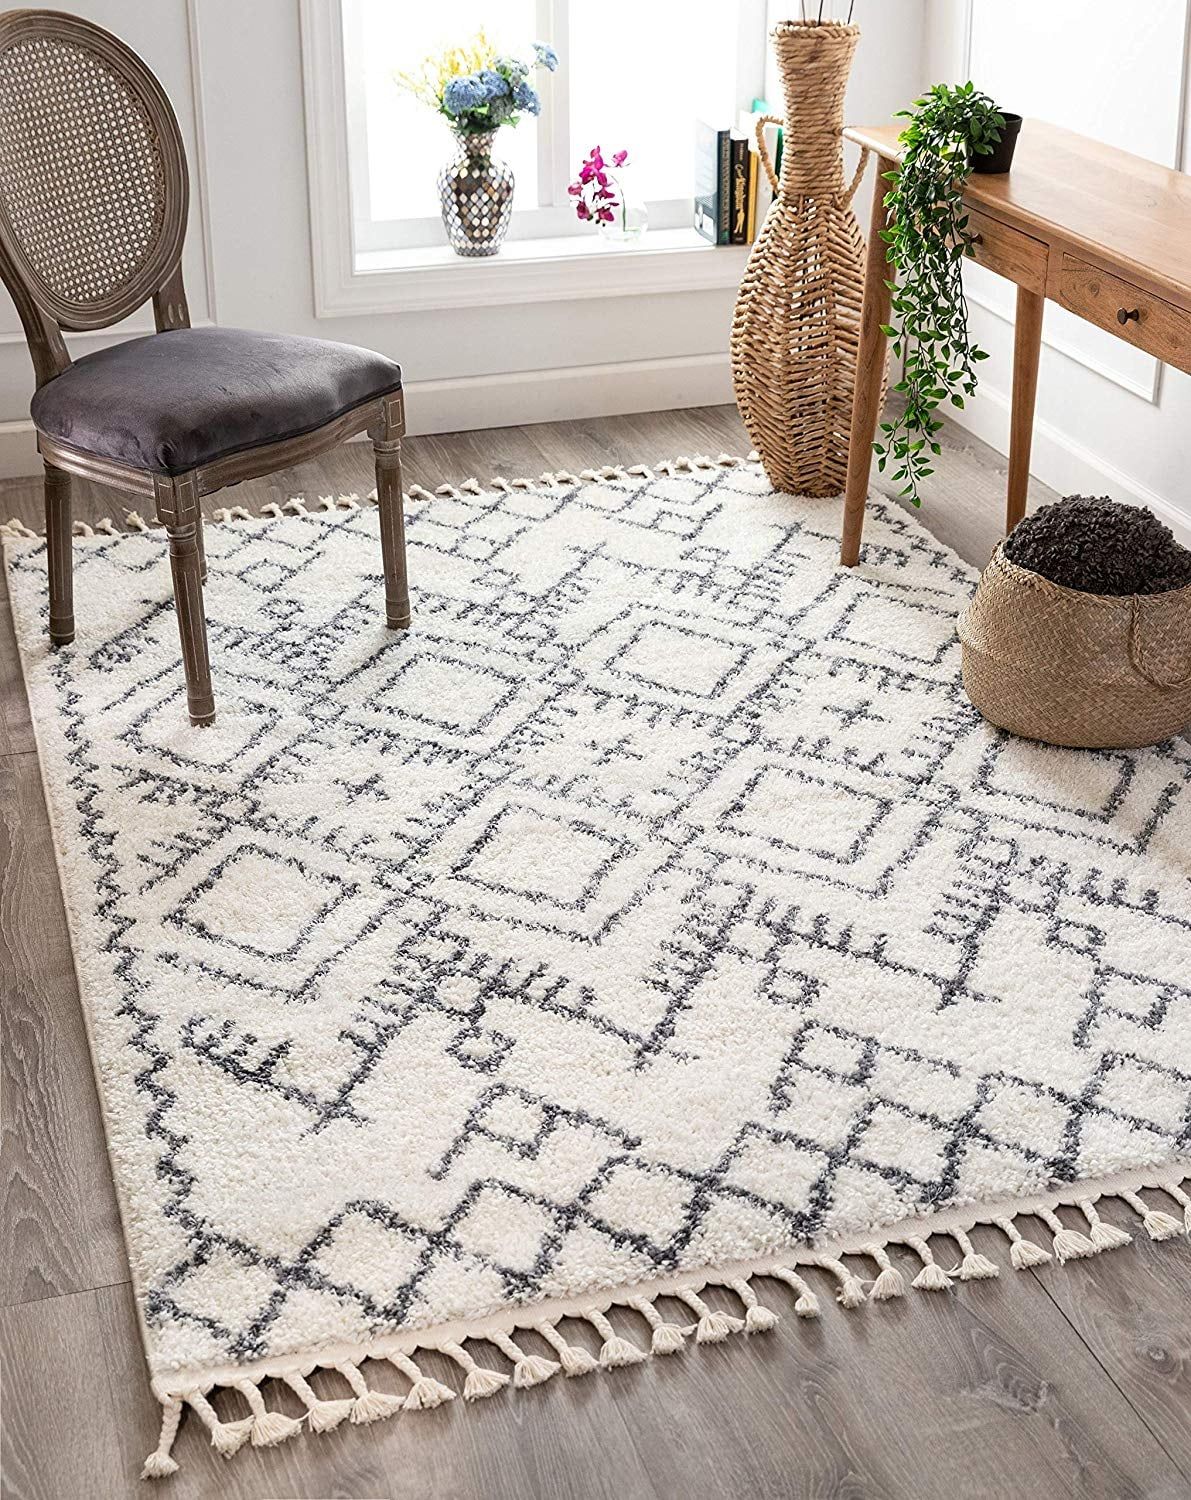 Well Woven Chessa Grey Moroccan Shag Rug | Amazon's 26 Swankiest Gifts For  Your Favorite Homebody | Popsugar Home Photo 16 Throughout Moroccan Shag Rugs (View 8 of 15)